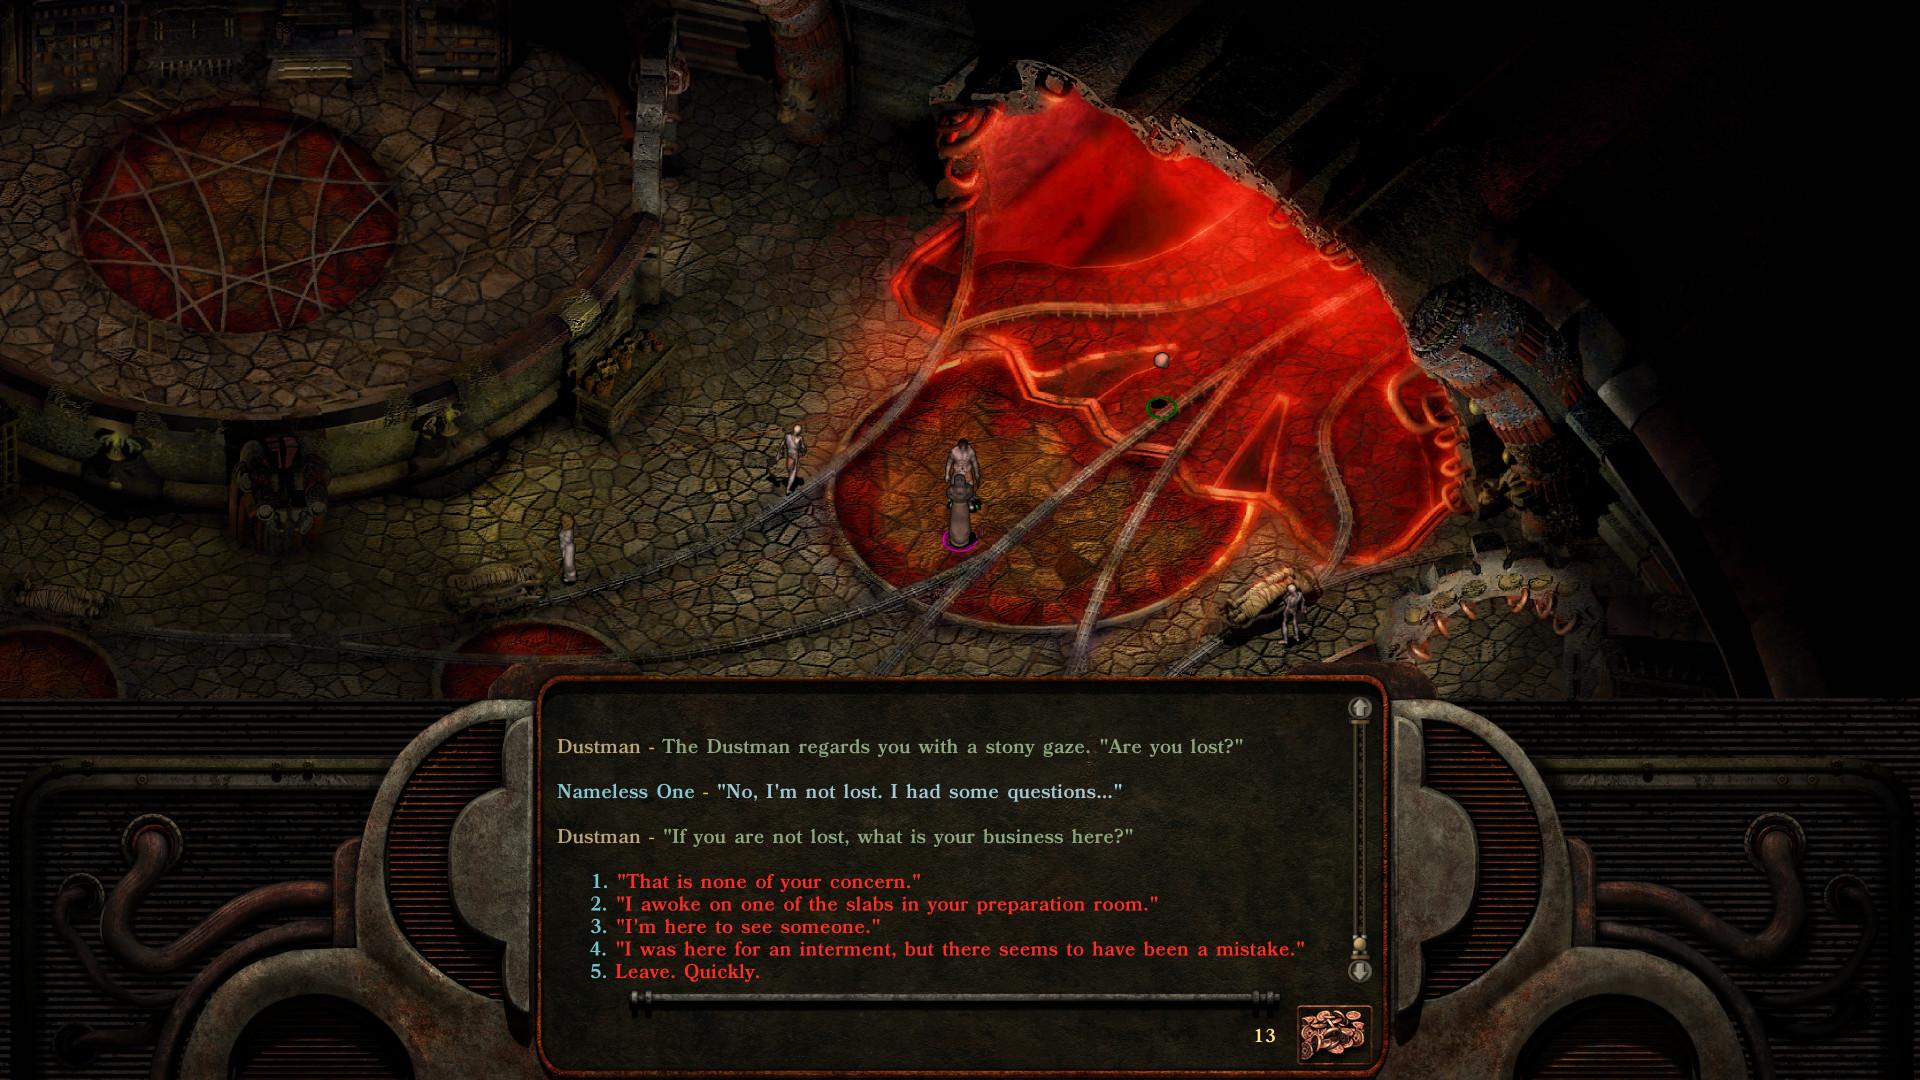 Screenshot №1 from game Planescape: Torment: Enhanced Edition